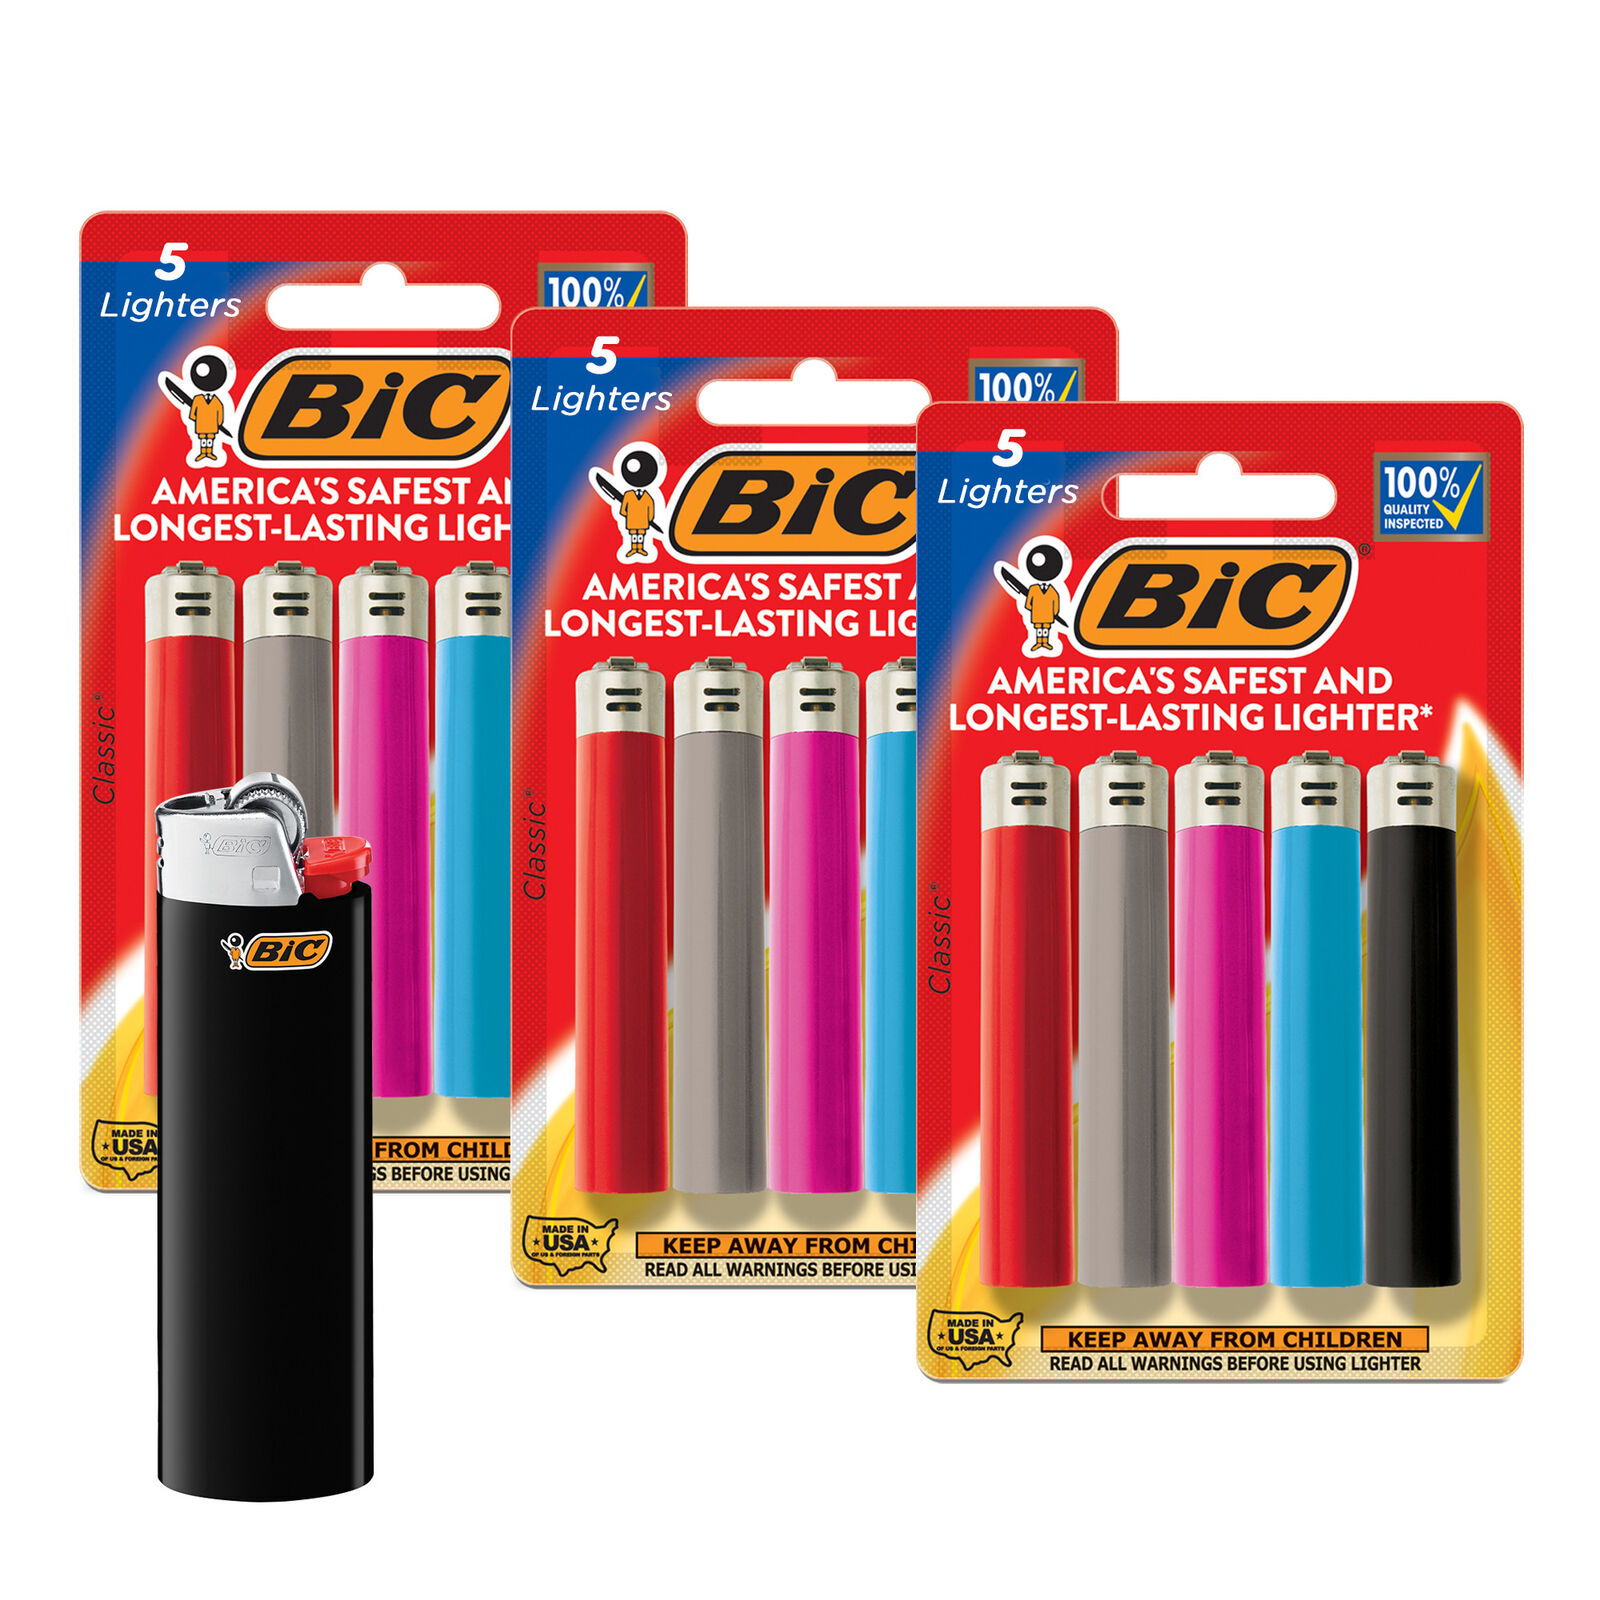 BIC Classic Maxi Pocket Lighter, 15-Count, Assorted Colors, 3 Packs of 5, Safe